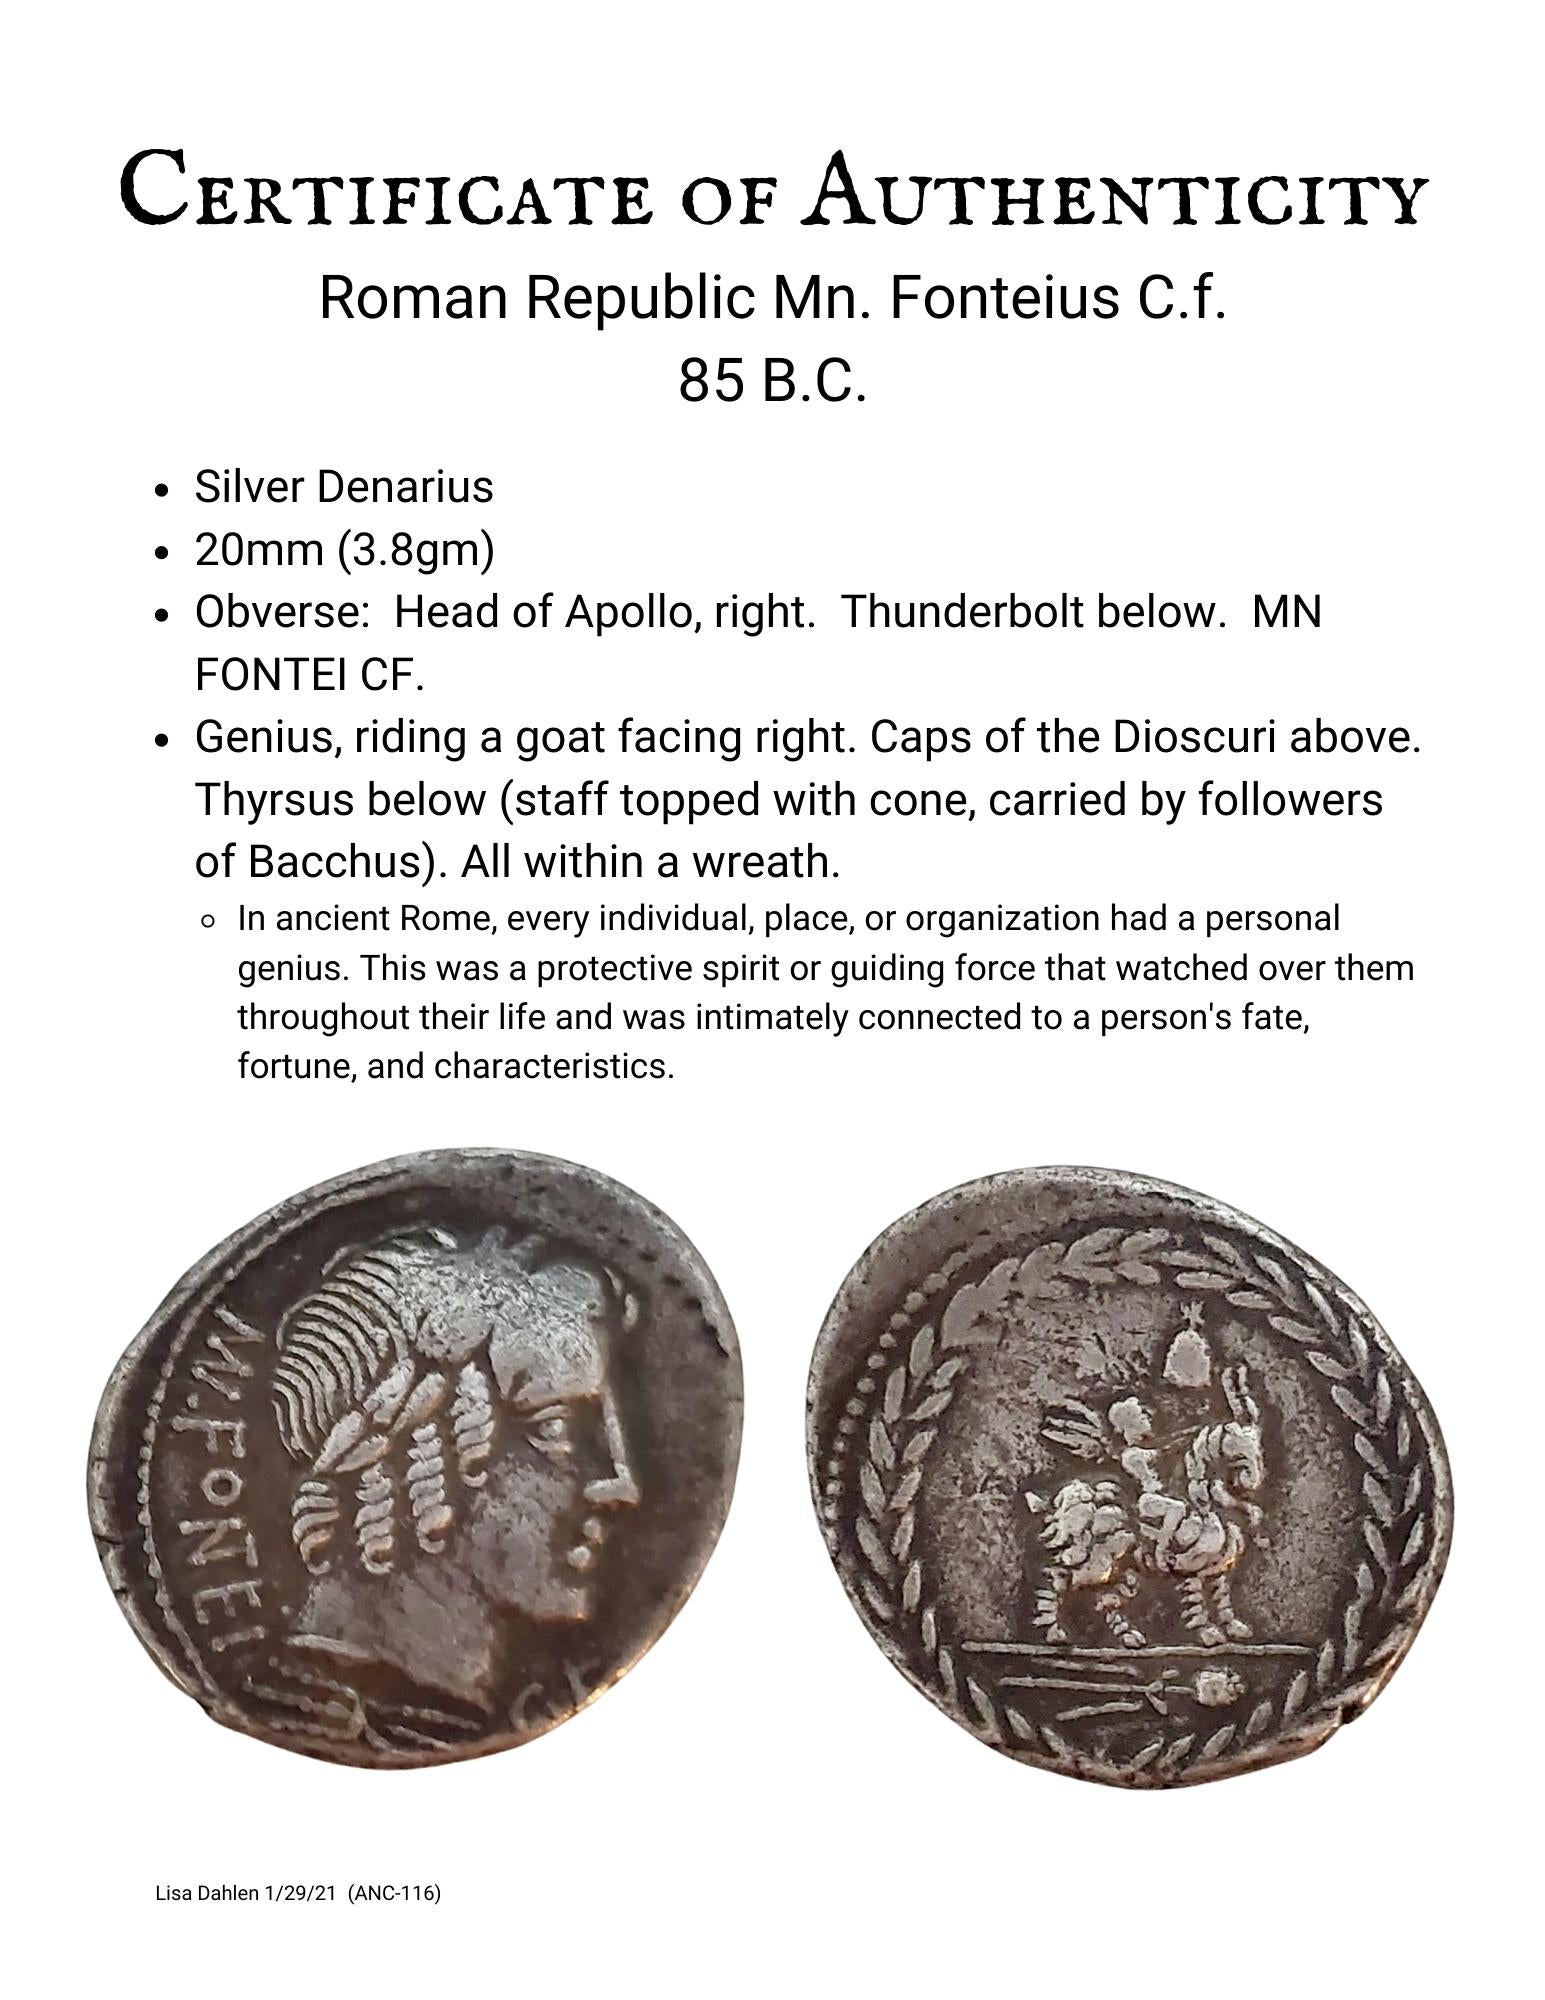 Certificate of authenticity of ancient Roman Republic silver coin 85 BC of Apollo and winged Genius sitting on a goat.